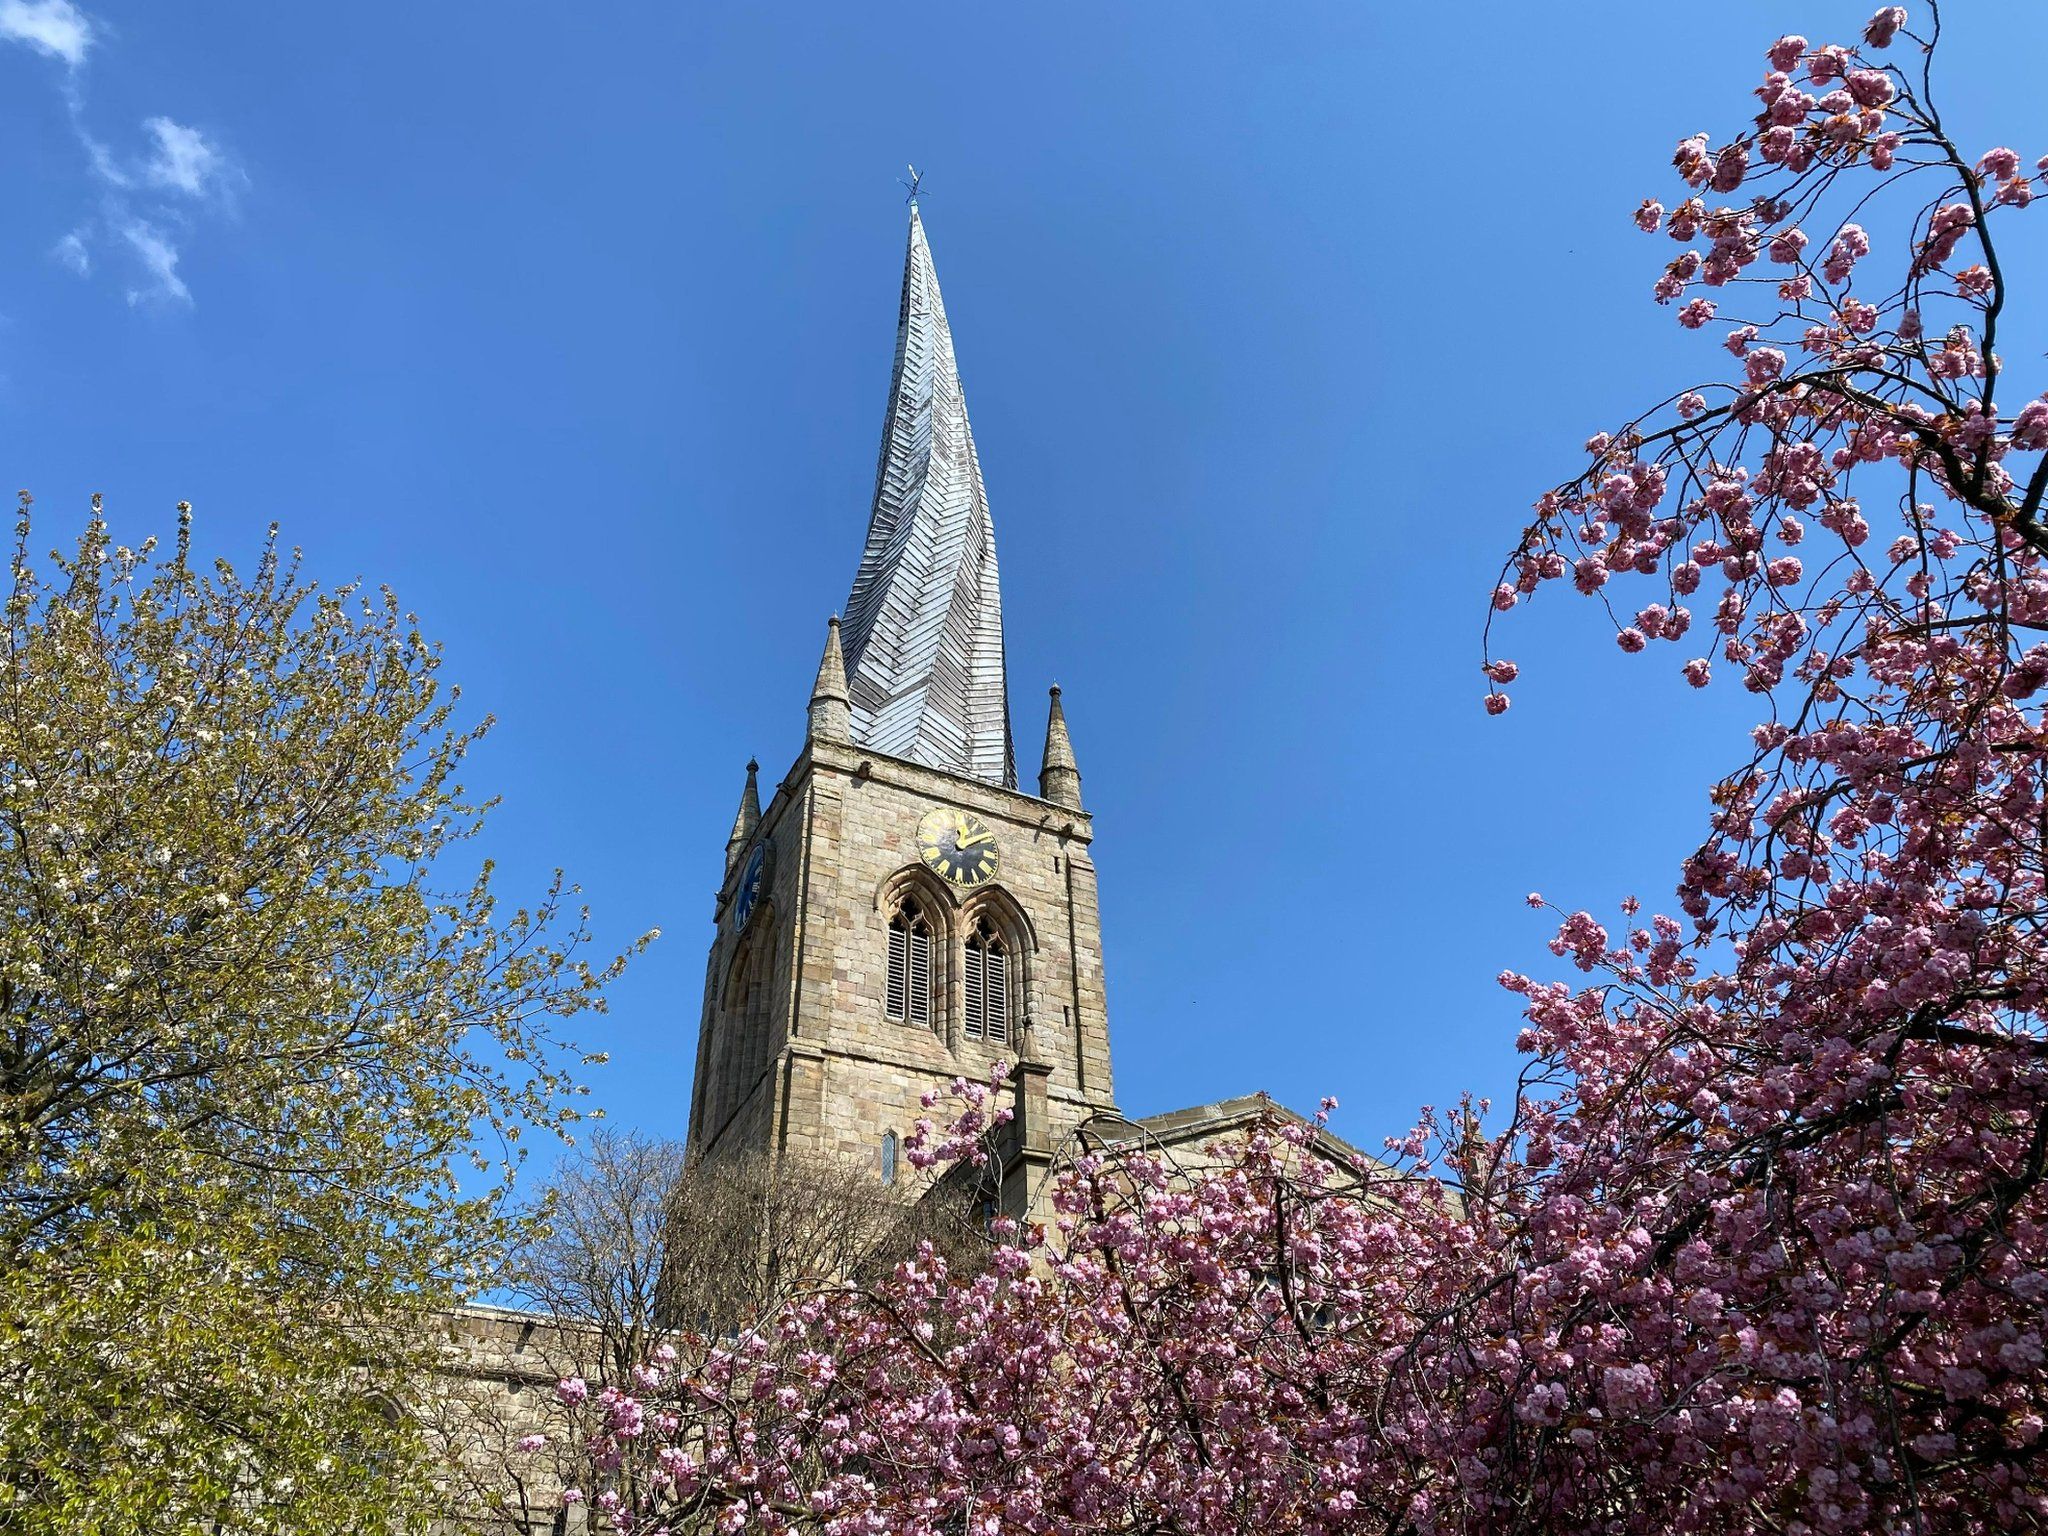 St Mary and All Saints Church, in Chesterfield, famous for the crooked spire